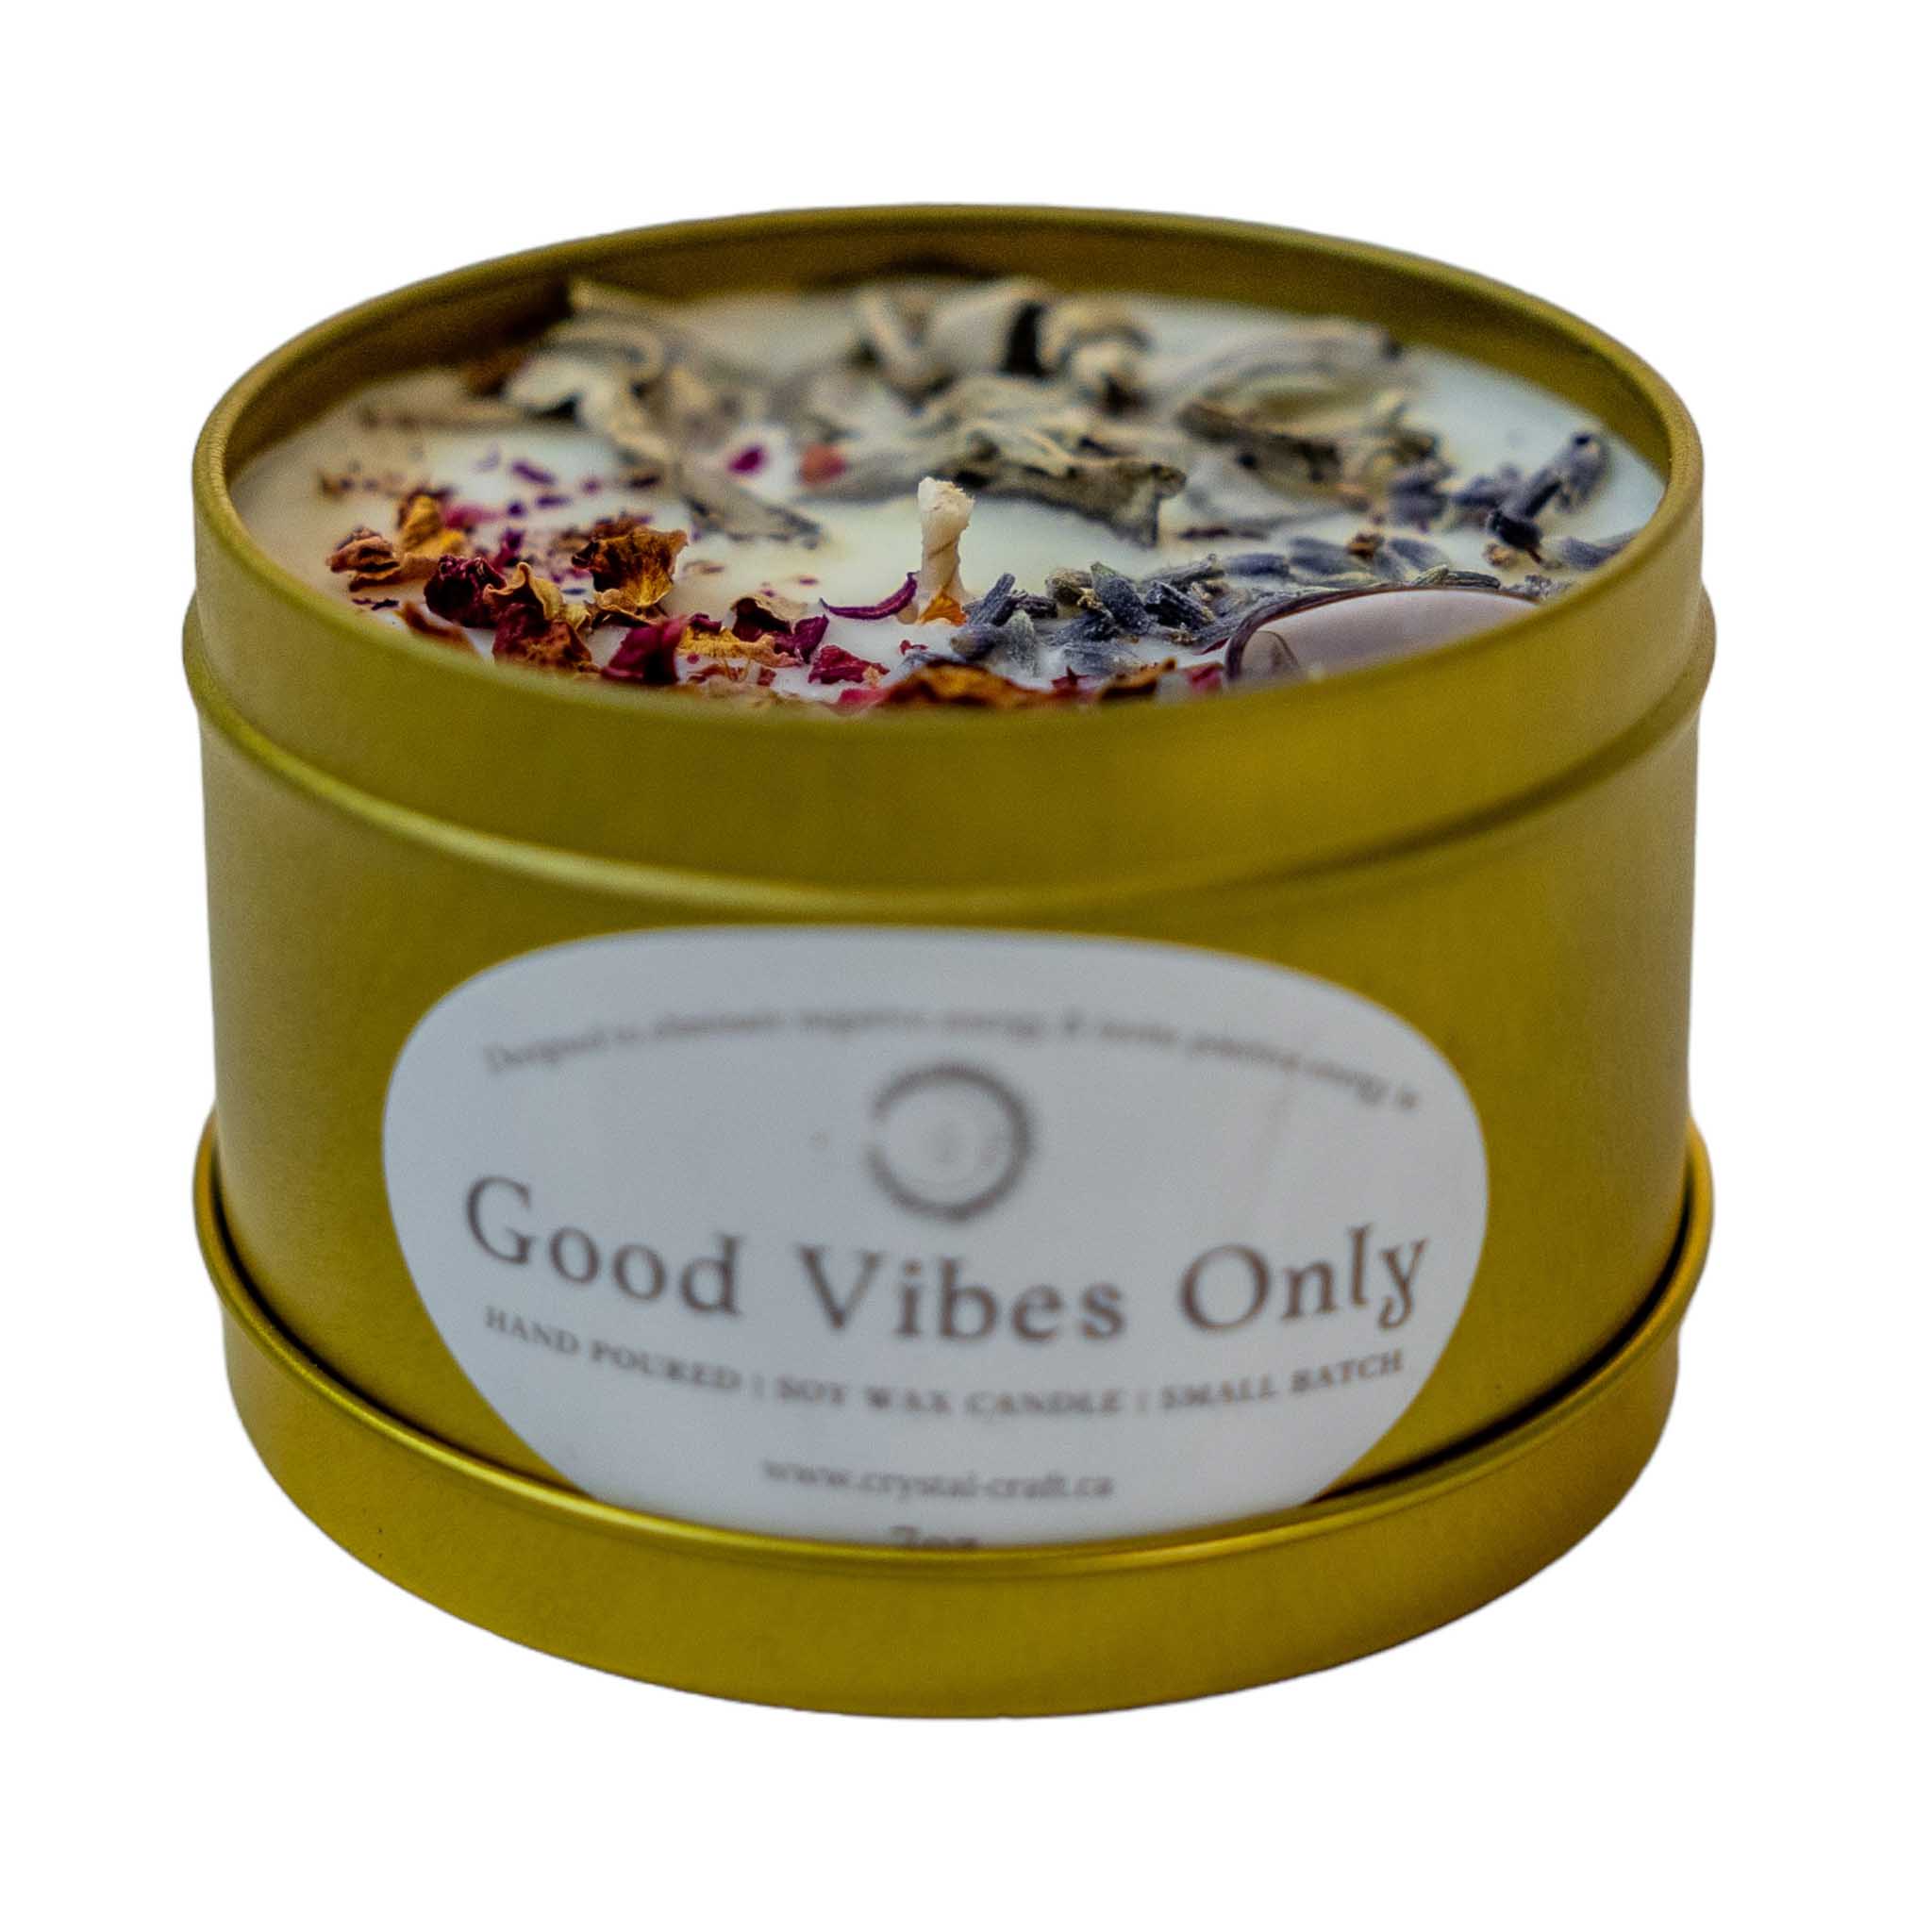 Crystal Craft Good Vibes Candle